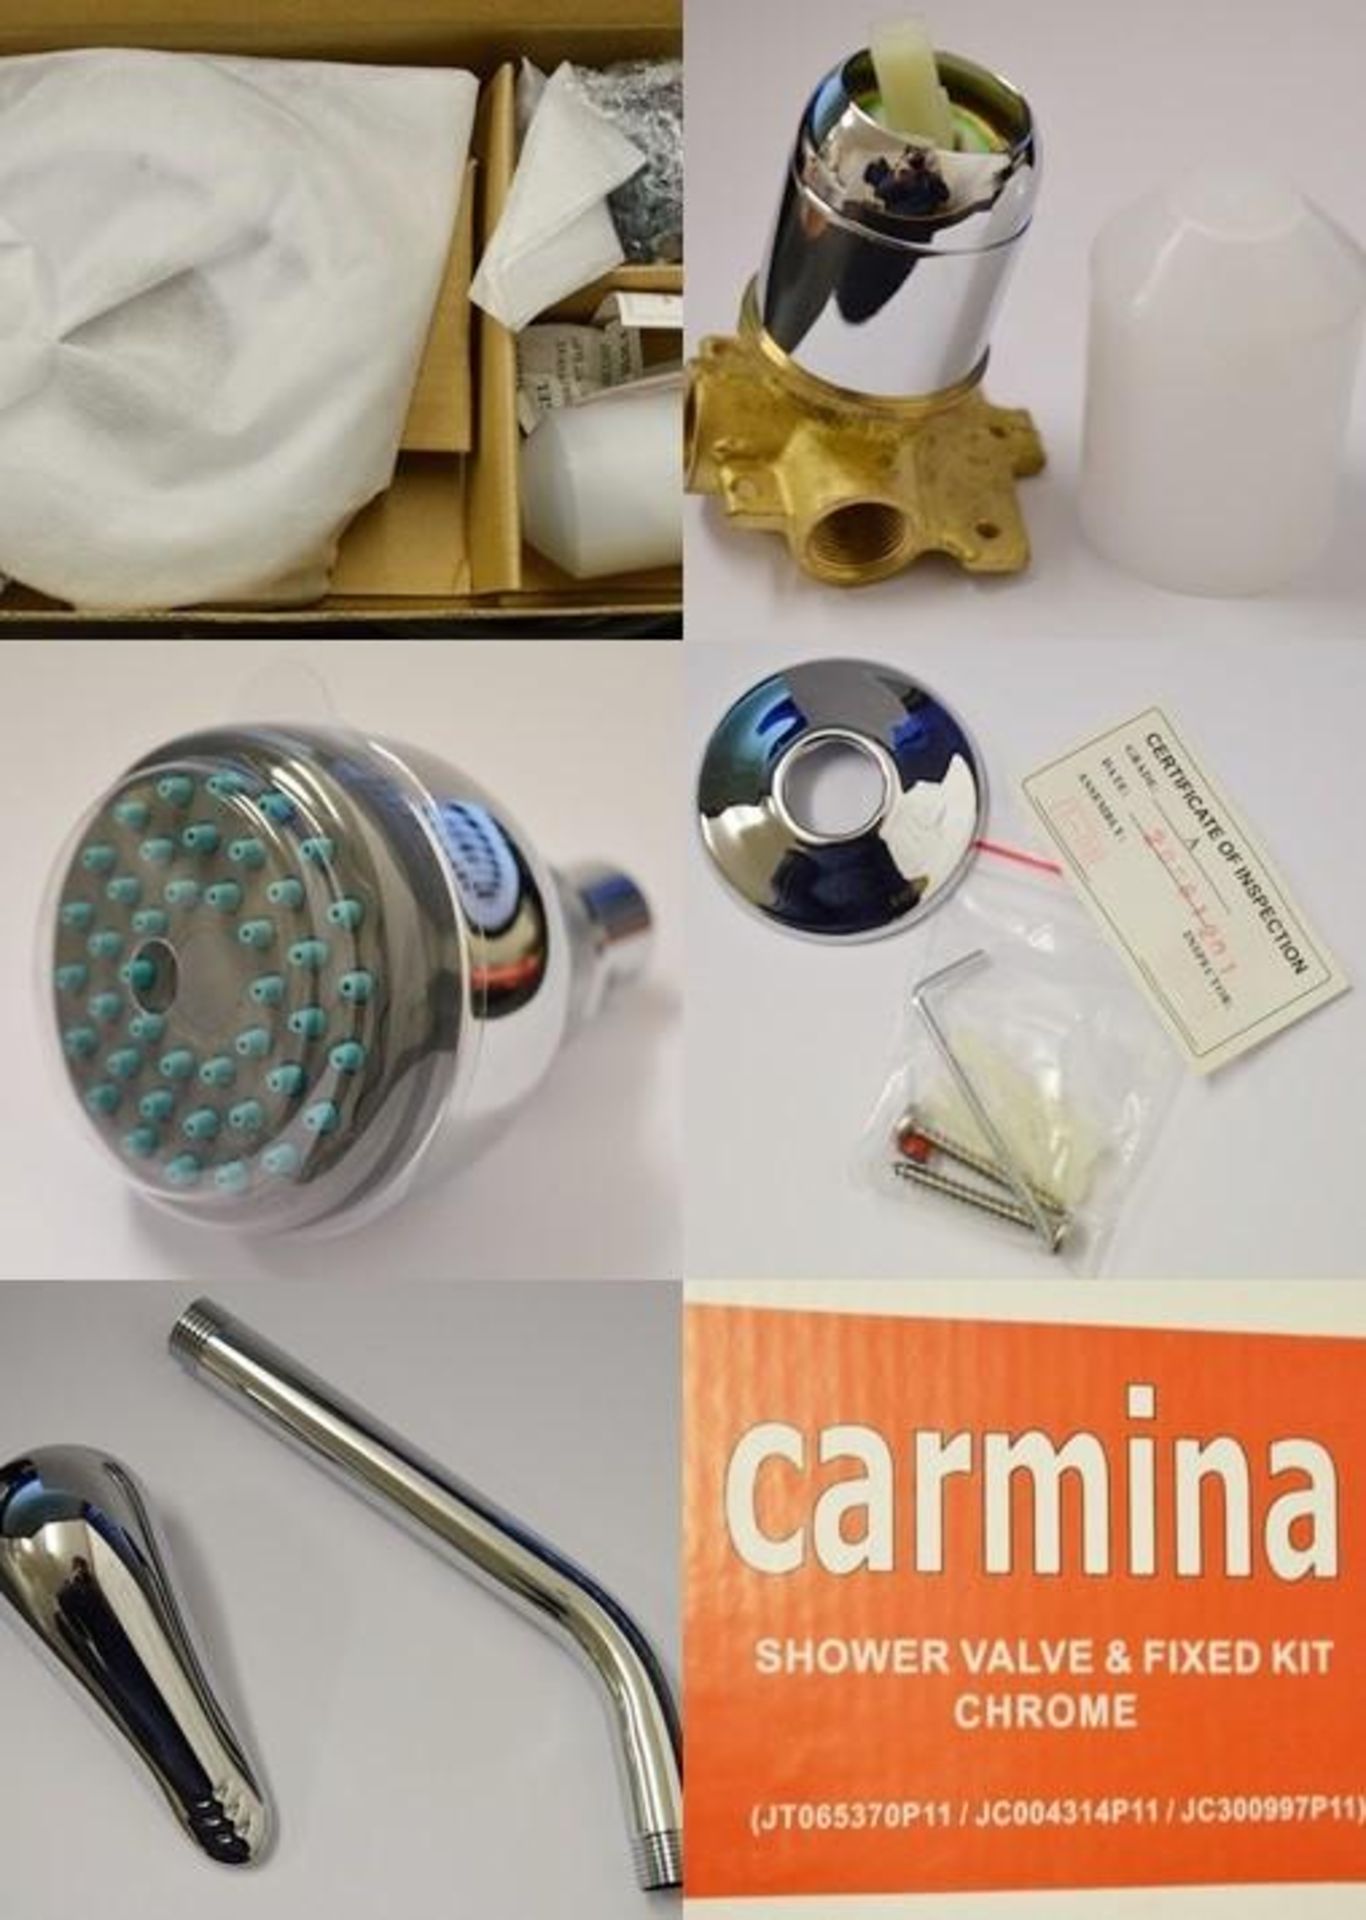 1 x Carmina Shower Valve Kit - Contains Chrome Shower Head, Fixed Arm and Manual Control - Brass Con